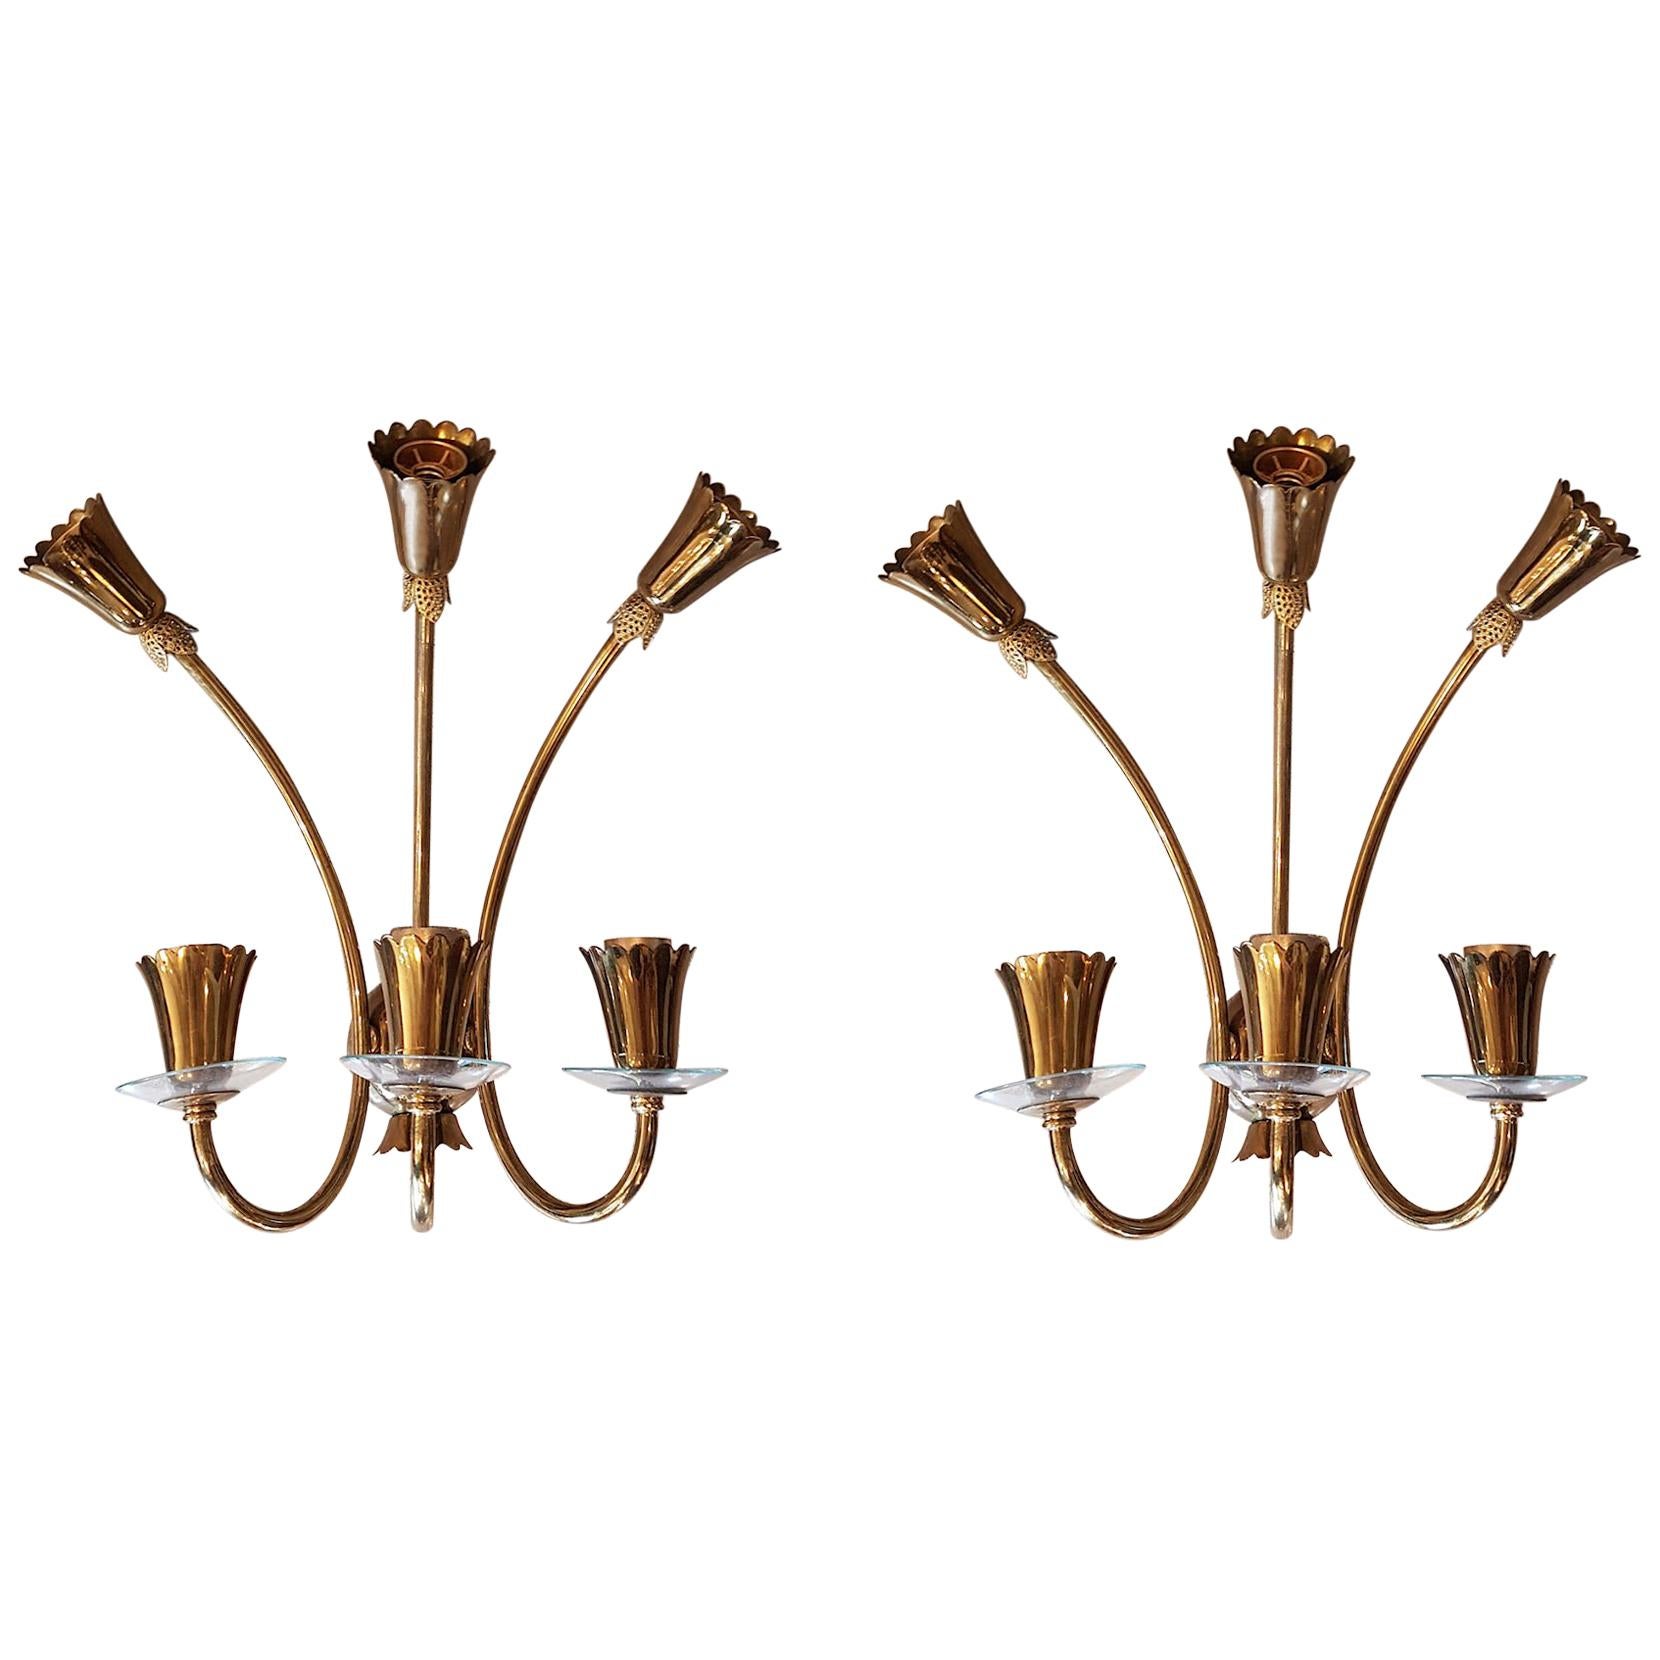 Pair of Brass and Glass Mid-Century Modern Sconces, Stilnovo Style, Italy, 1960s